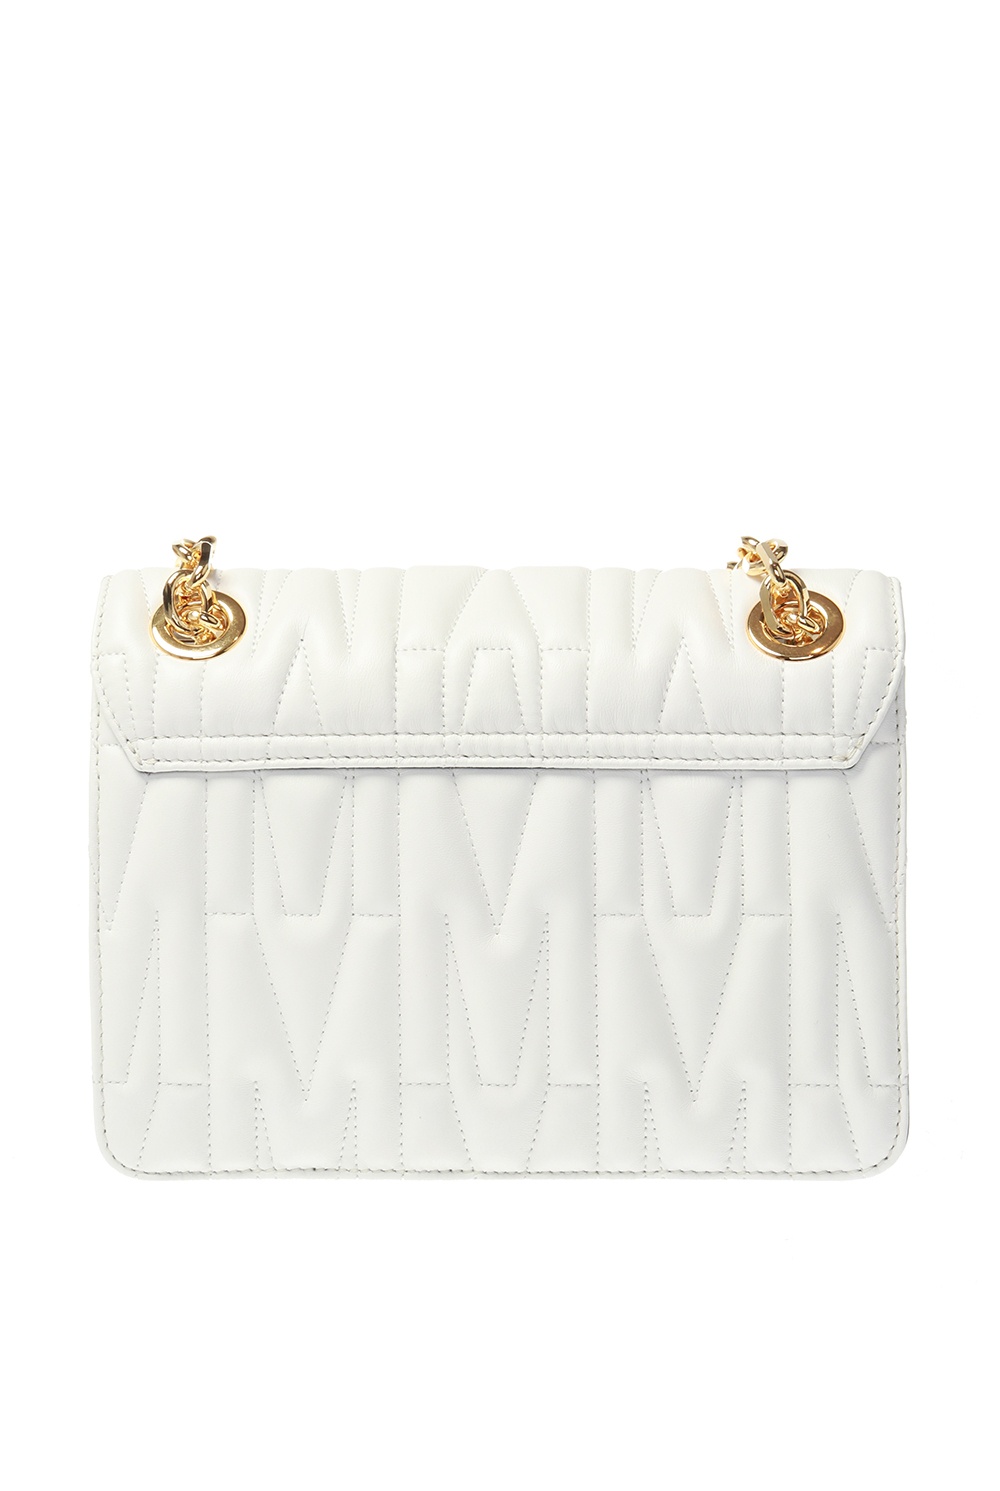 Moschino 'M Quilted' shoulder bag